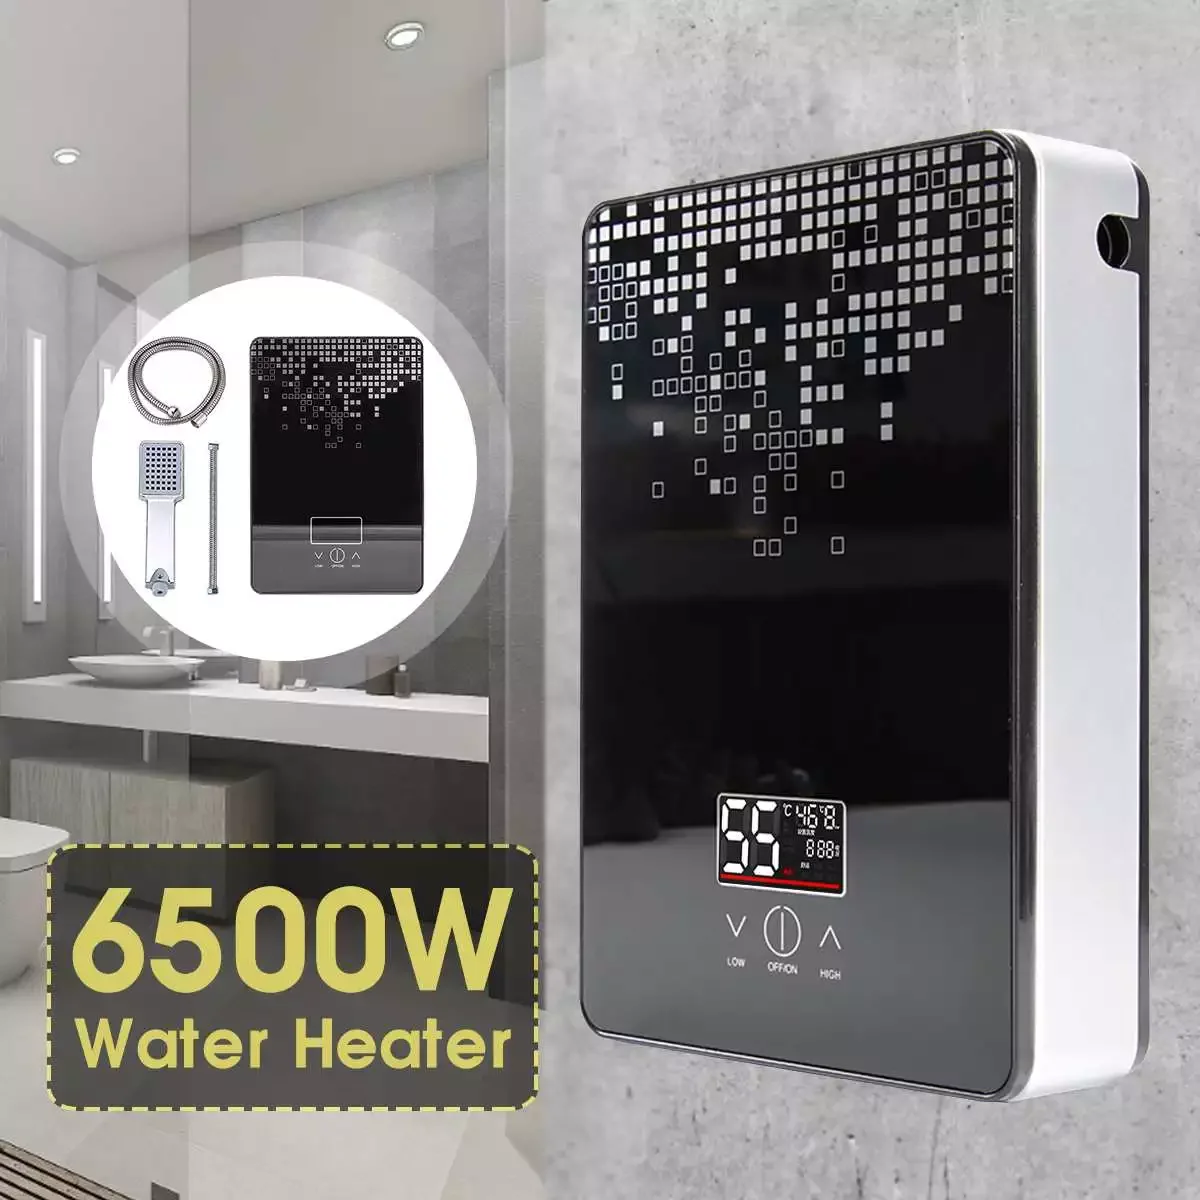 Enlarge 220V 6500W Electric Water Heater Multi-purpose Household Hot-Water Heater Instant Tankless Bathroom Shower Water Heater